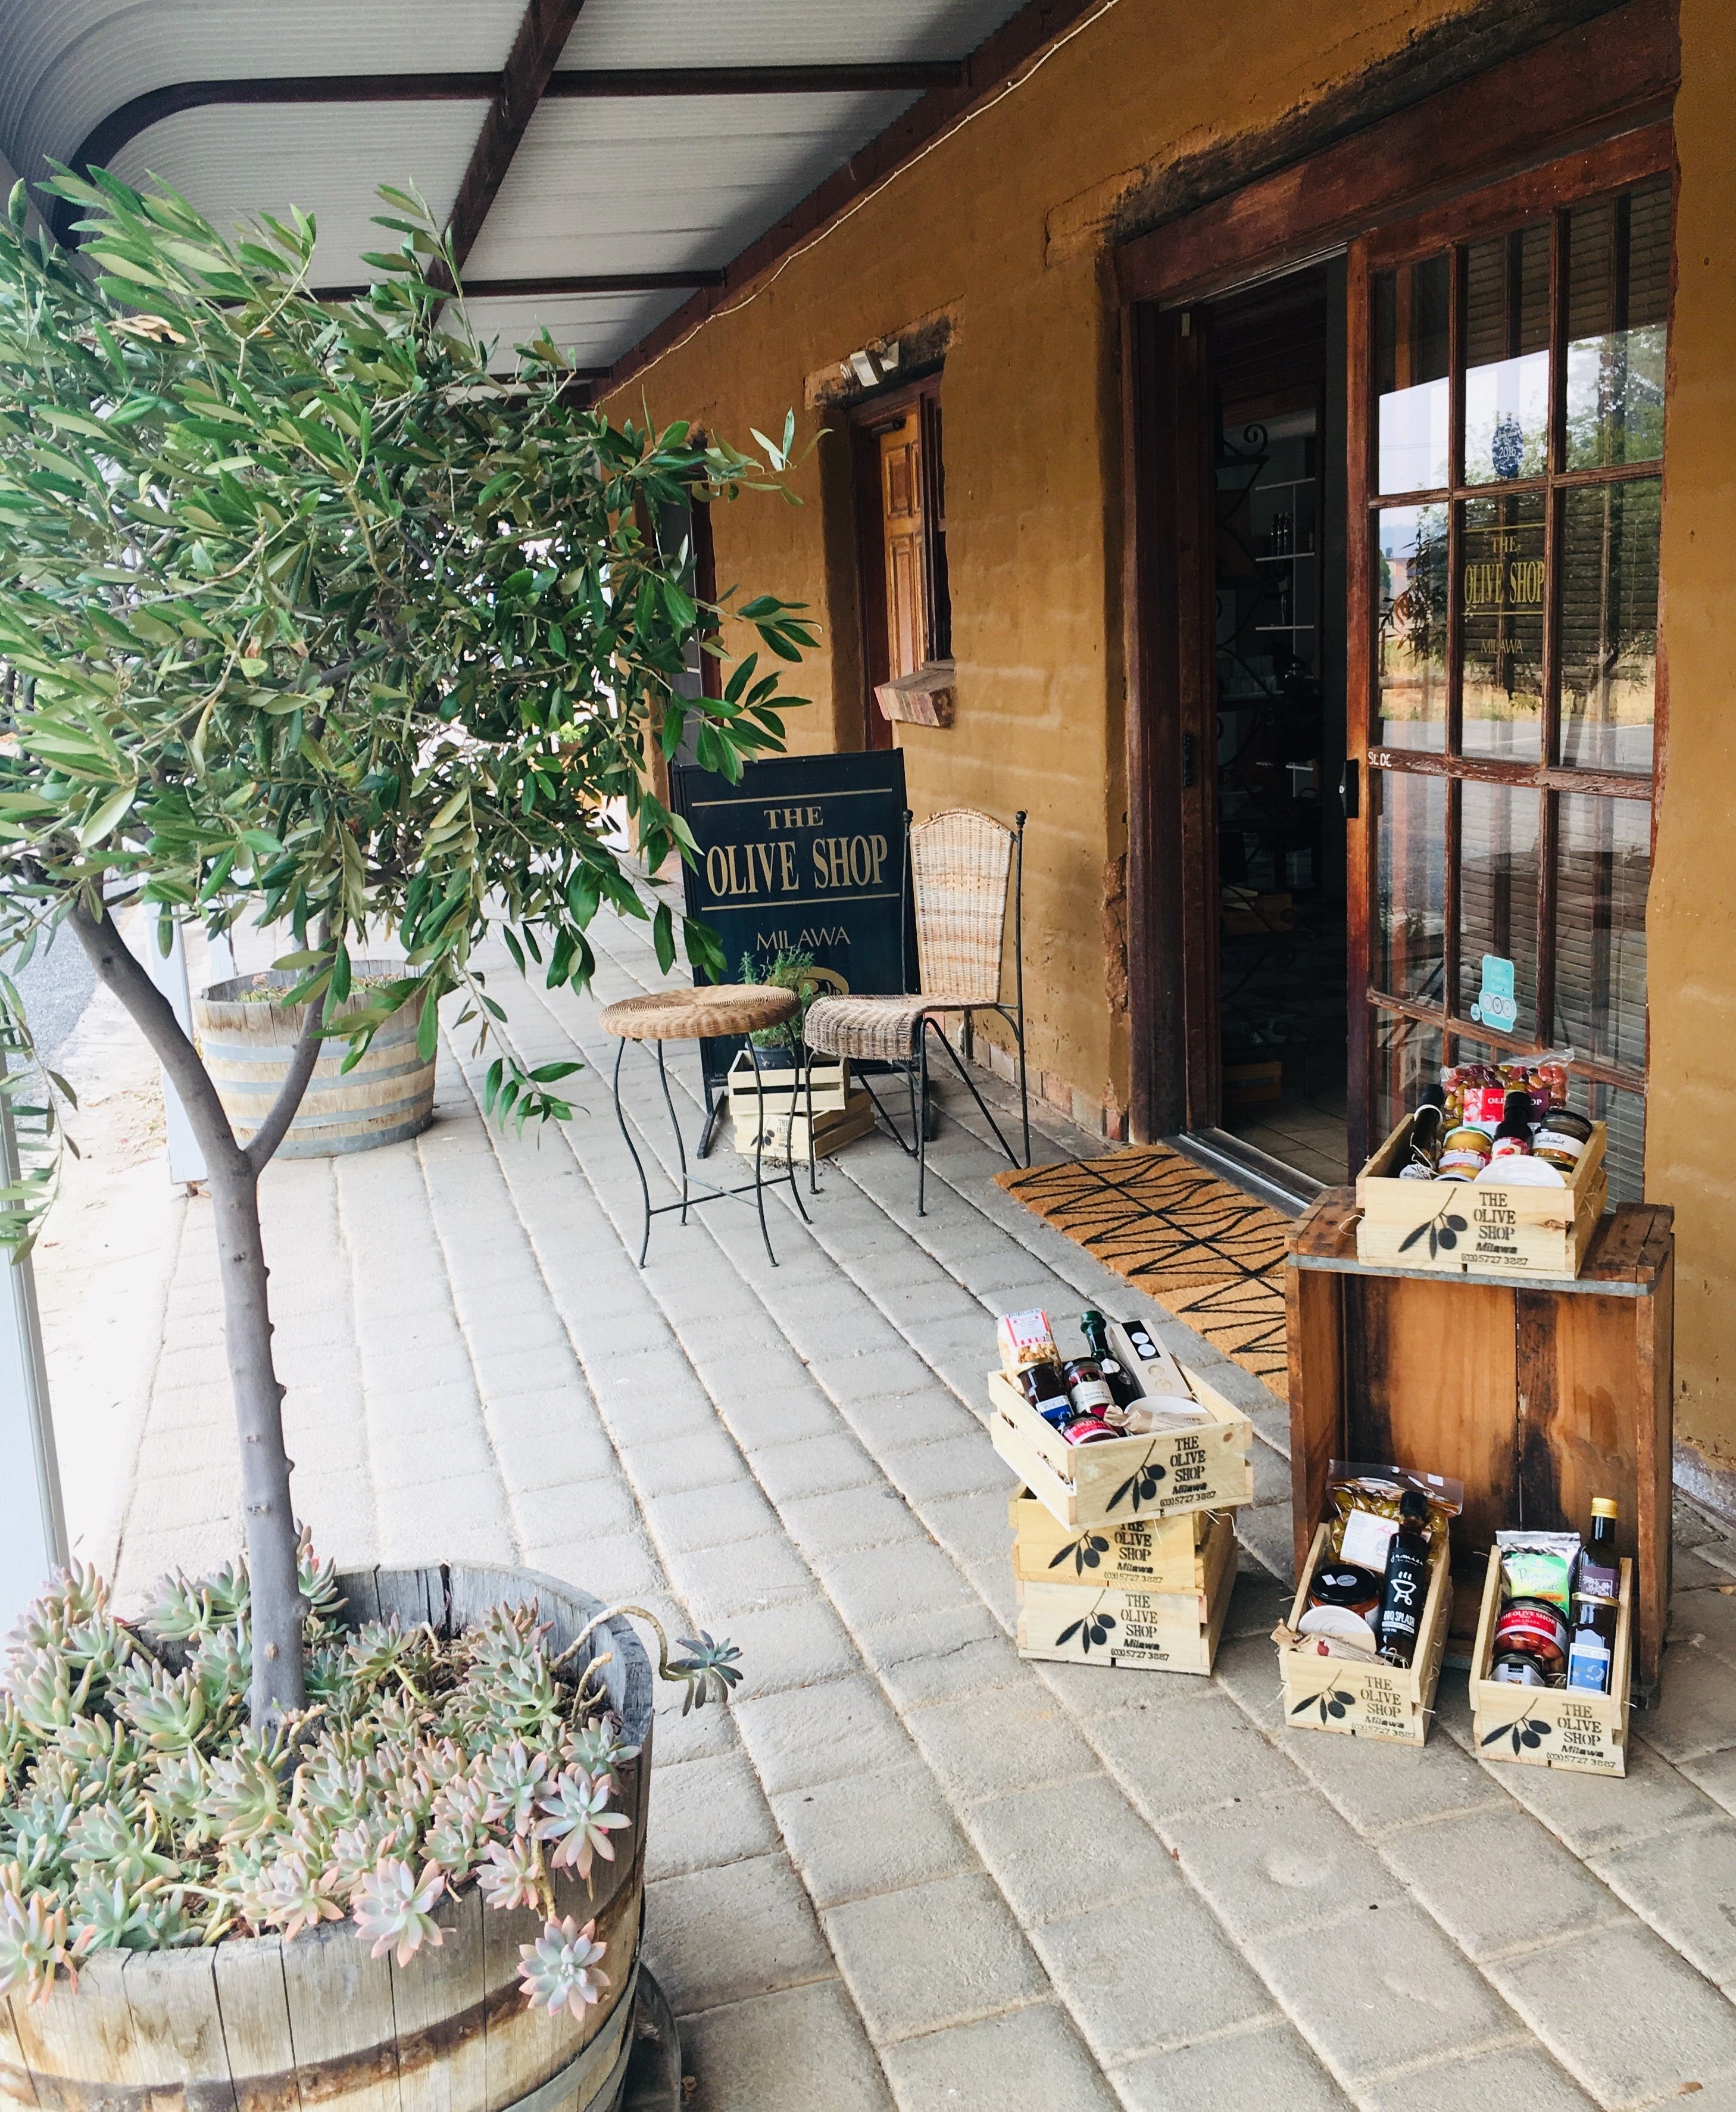 The Olive Shop - Milawa - Accommodation Mt Buller